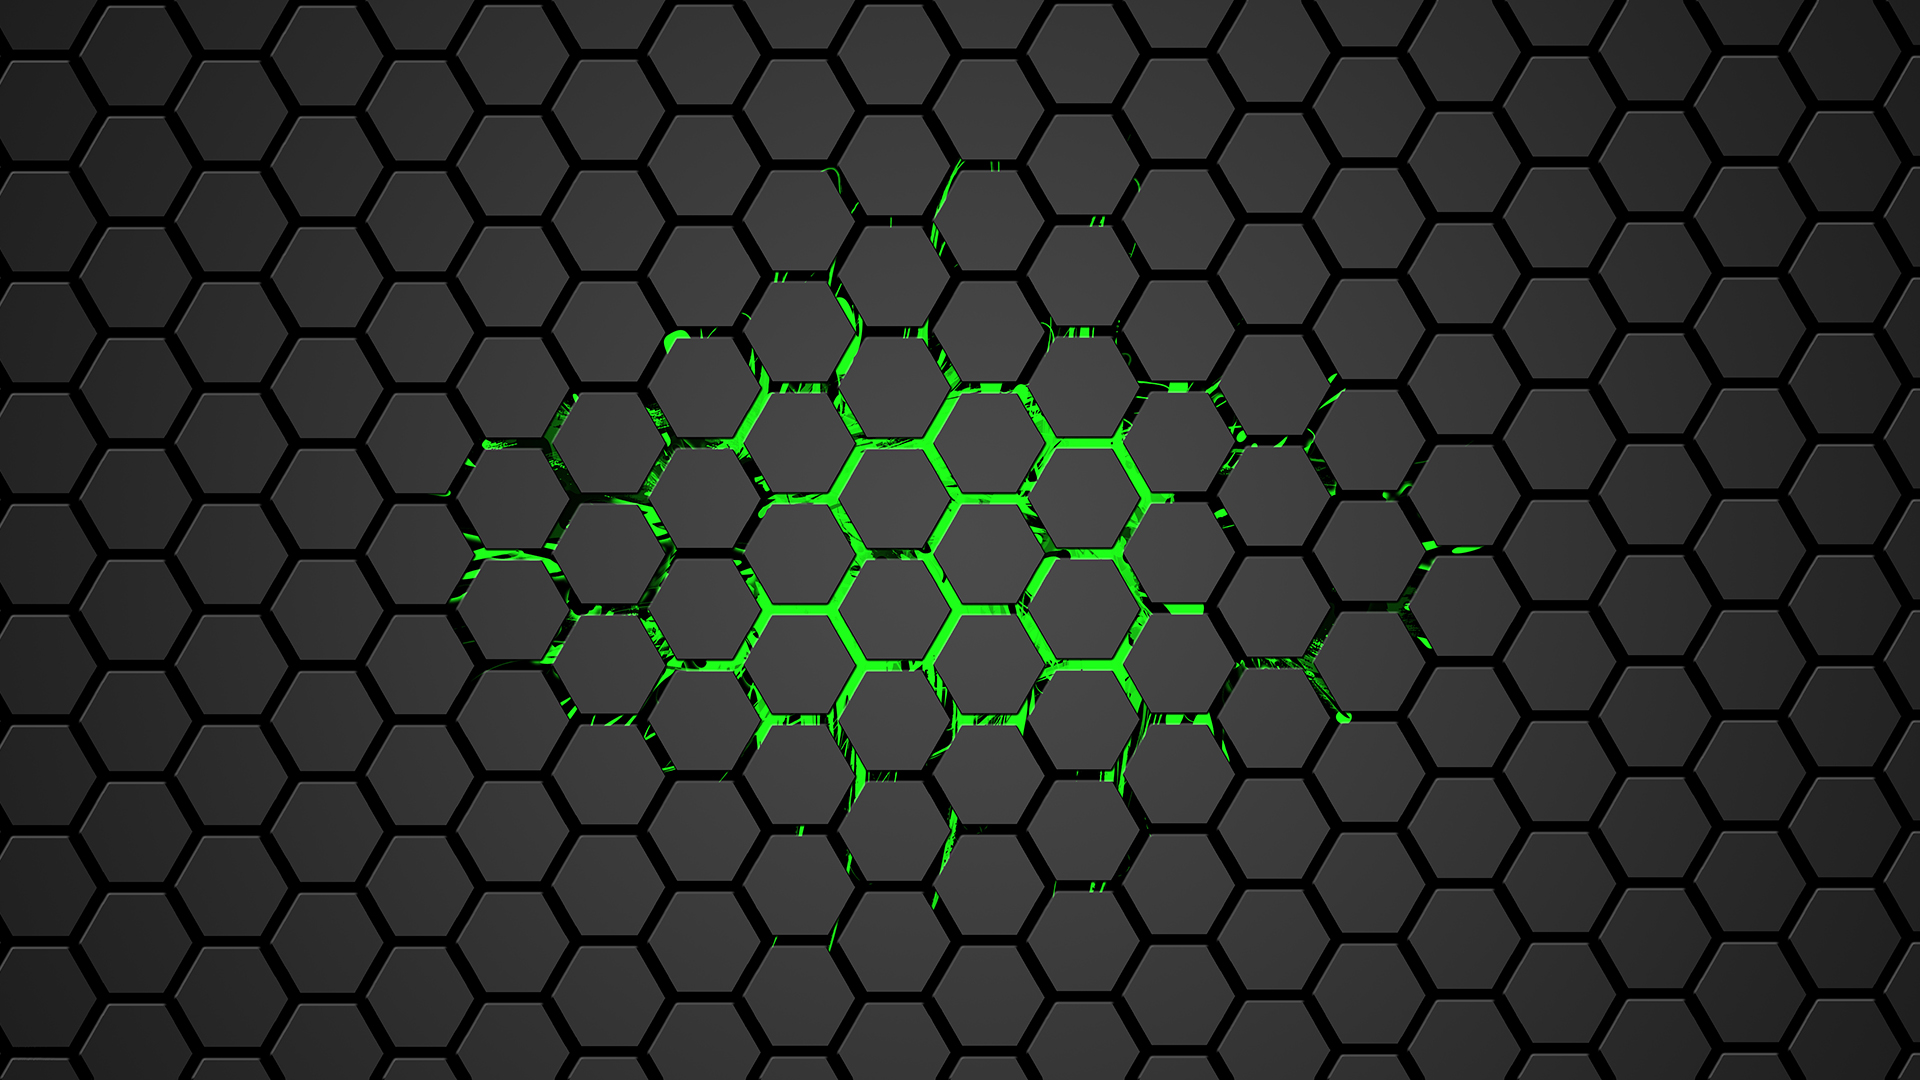 Free Download Hex Green By Sh4rk2010 1920x1080 For Your Desktop Mobile Tablet Explore 19 Green Hexagon Wallpaper Blue Hexagon Wallpaper David Hicks Hexagon Wallpaper Hicks Hexagon Wallpaper